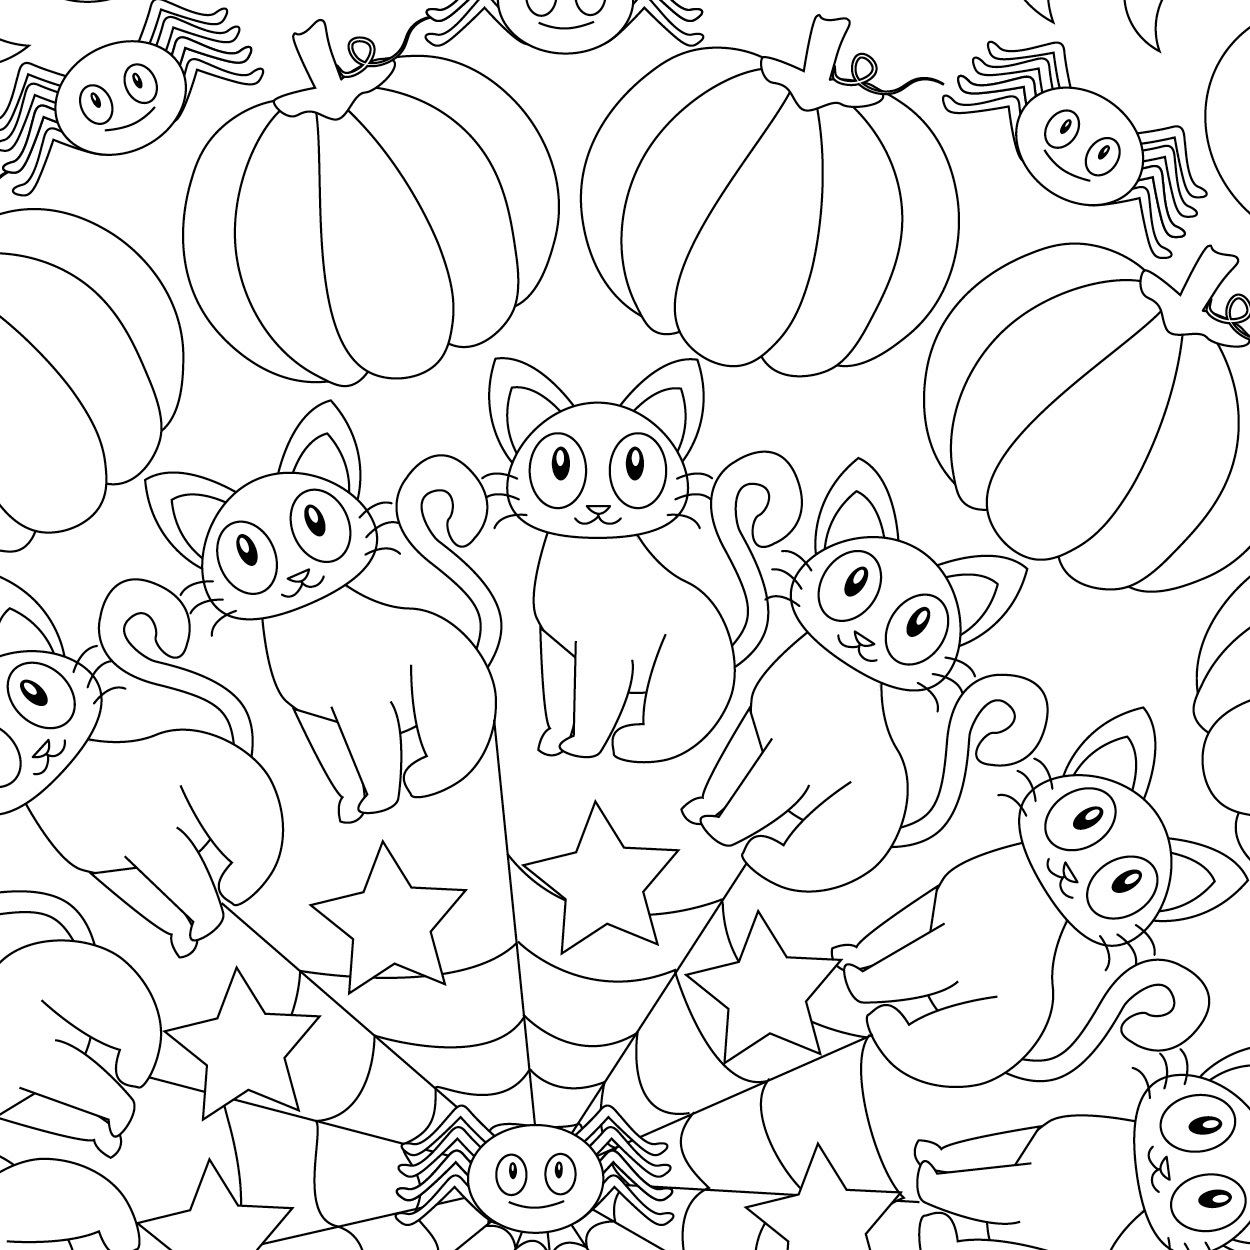 Halloween Colouring in pages